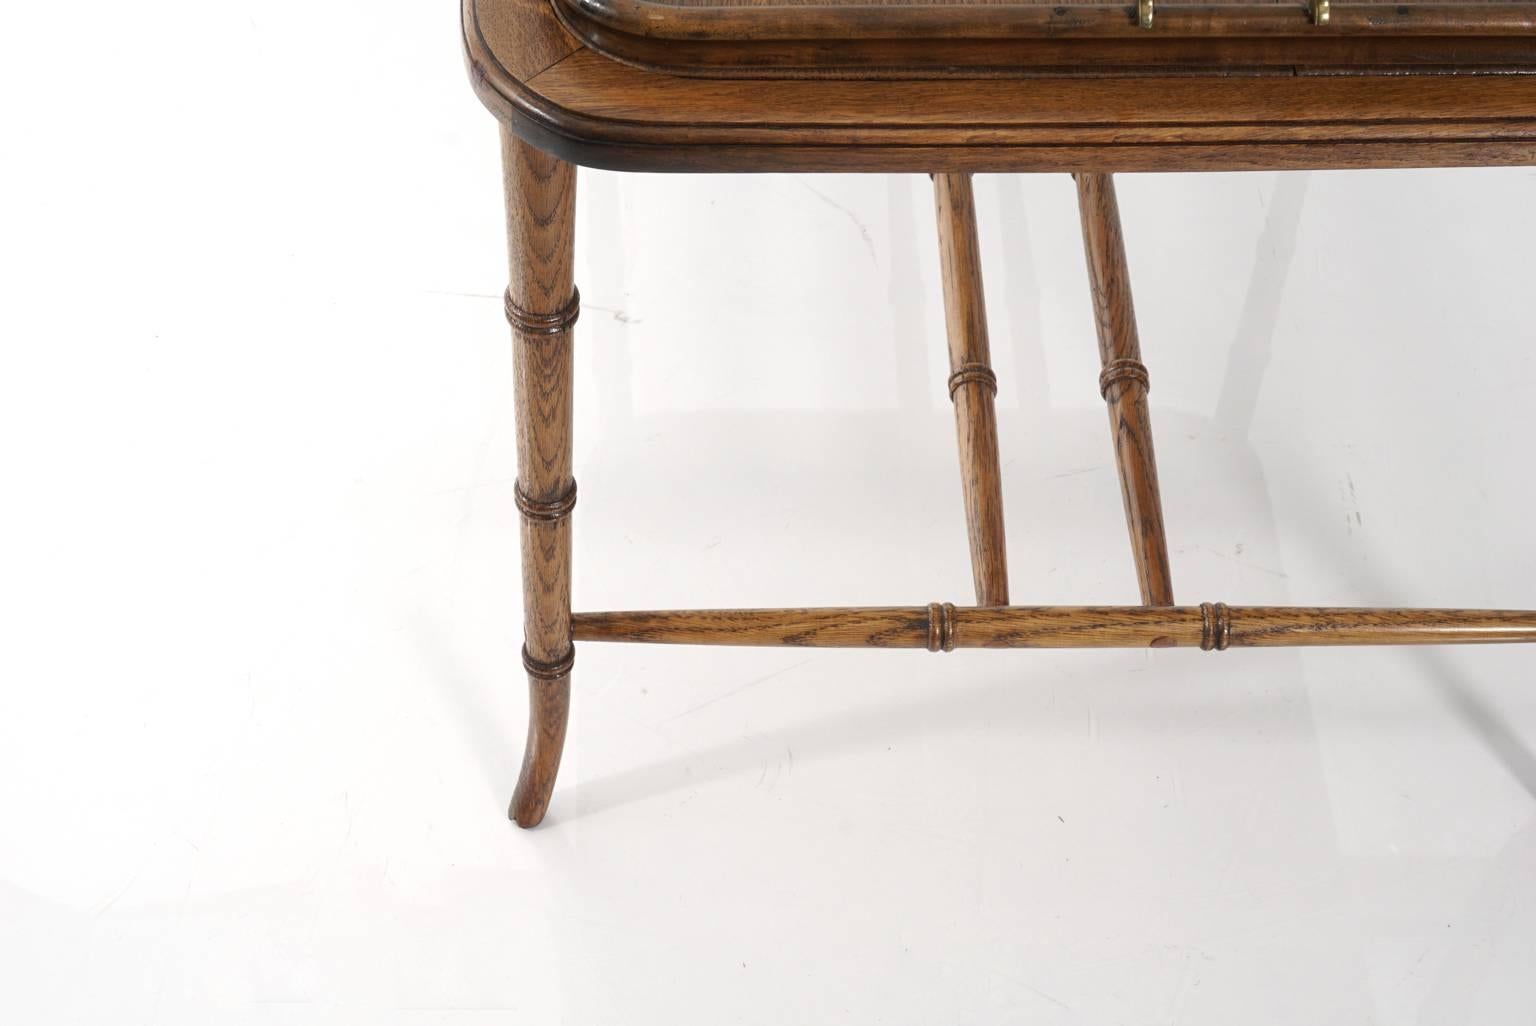 Faux bamboo English tray table with brass handles, circa 1950s. Tray is removable.